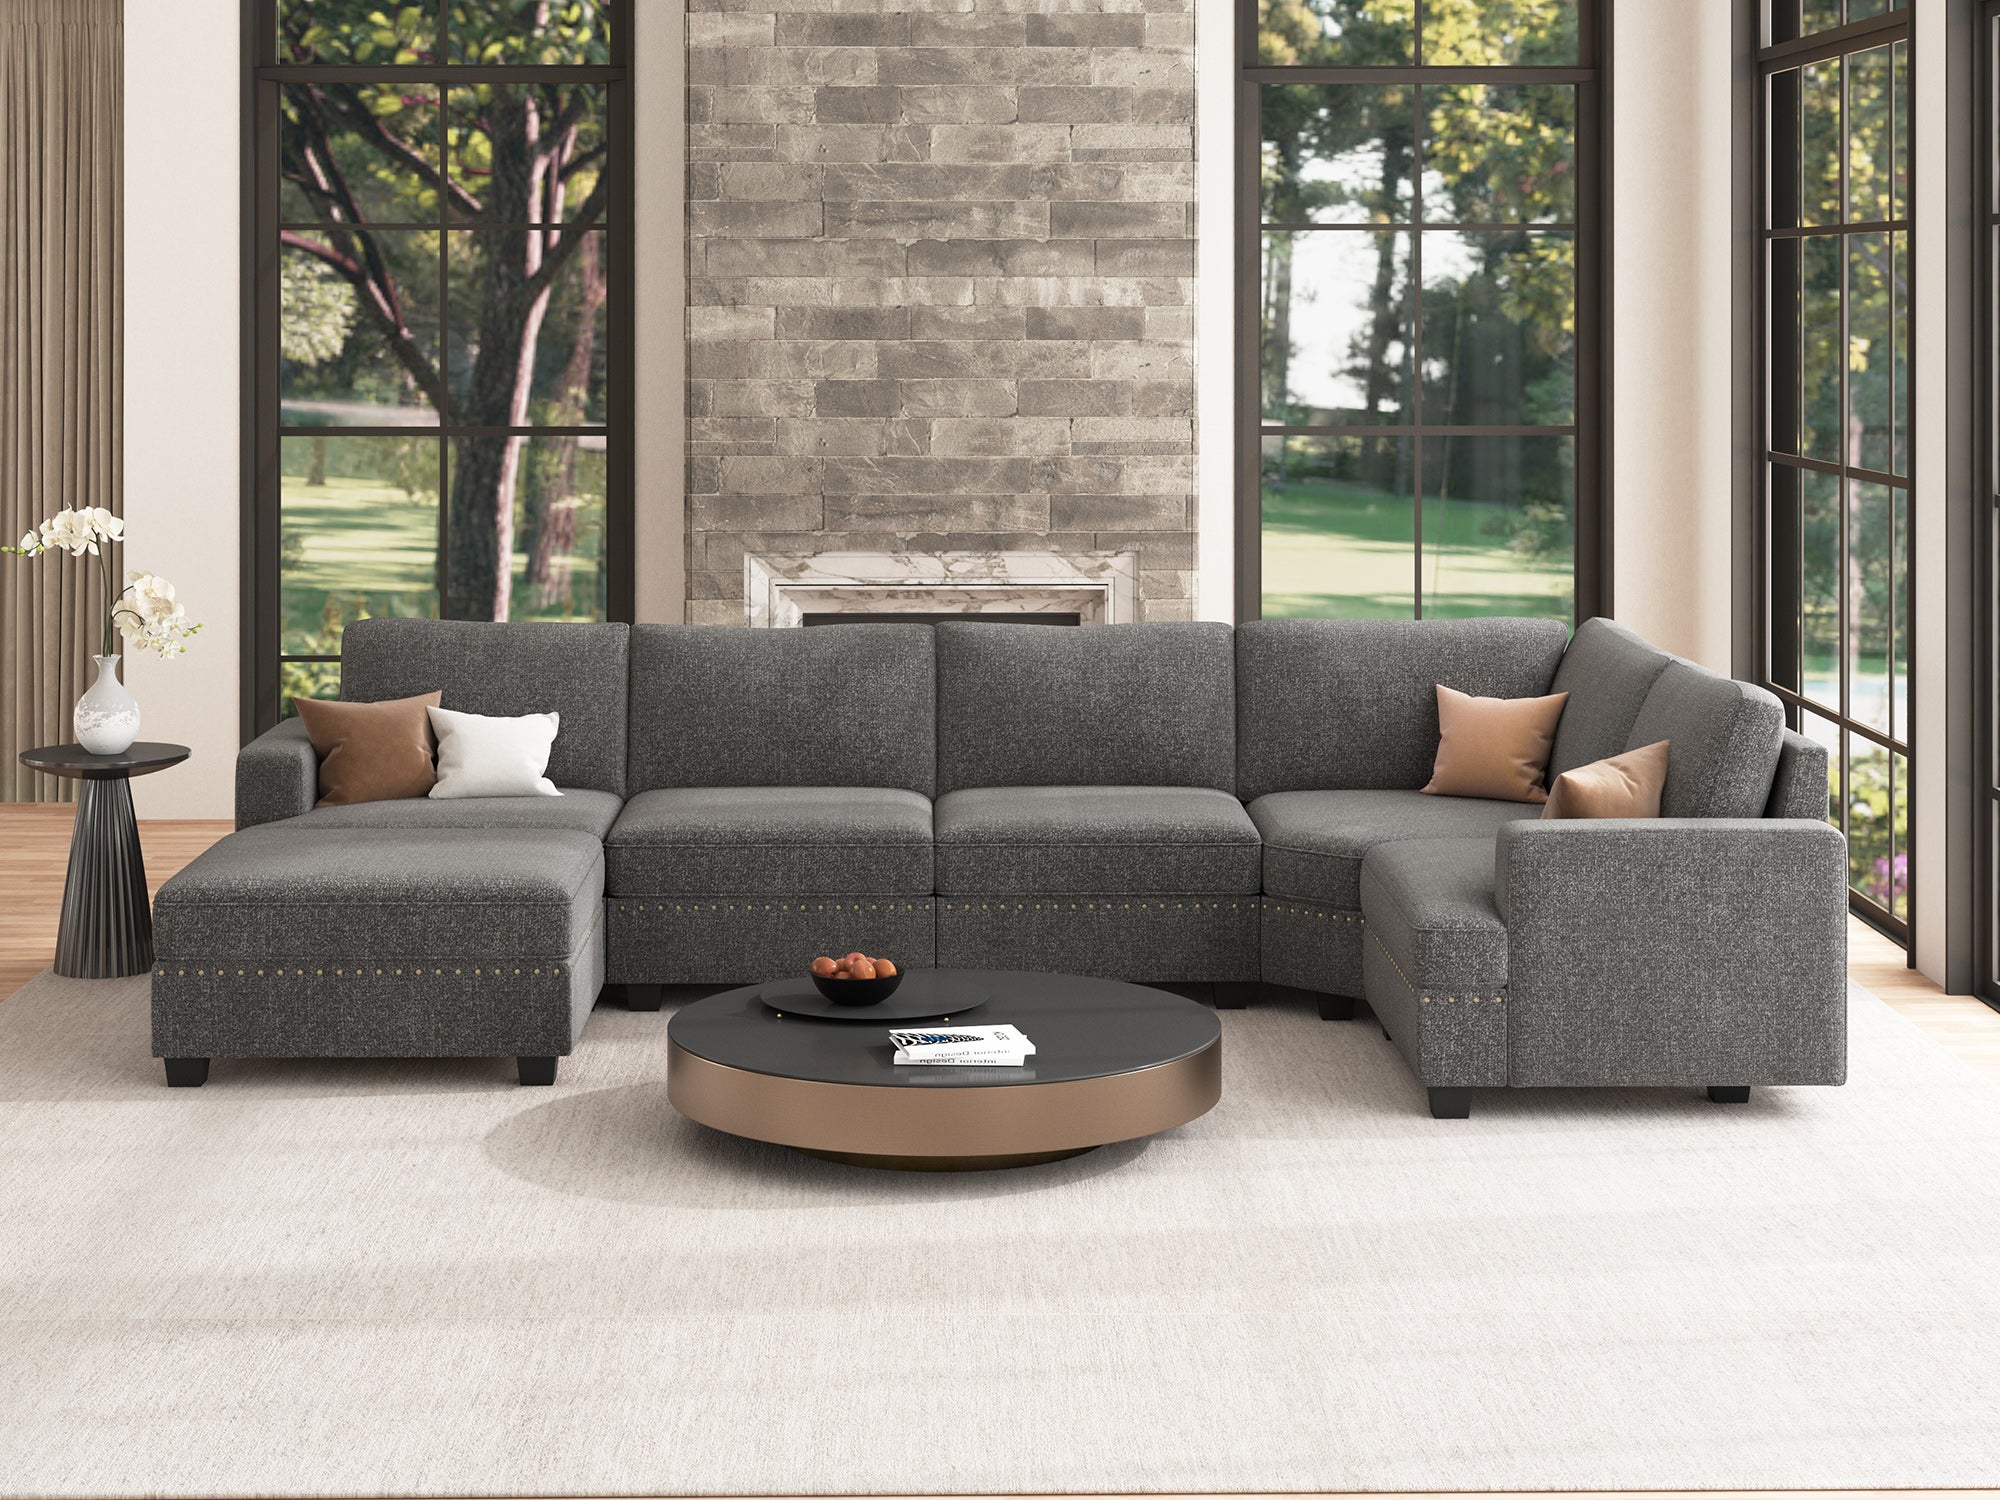 NOLANY U-Shaped Corner Modular Sofa Oversized Convertible Sectional Sofa Couch for Living Room #Color_Light Grey